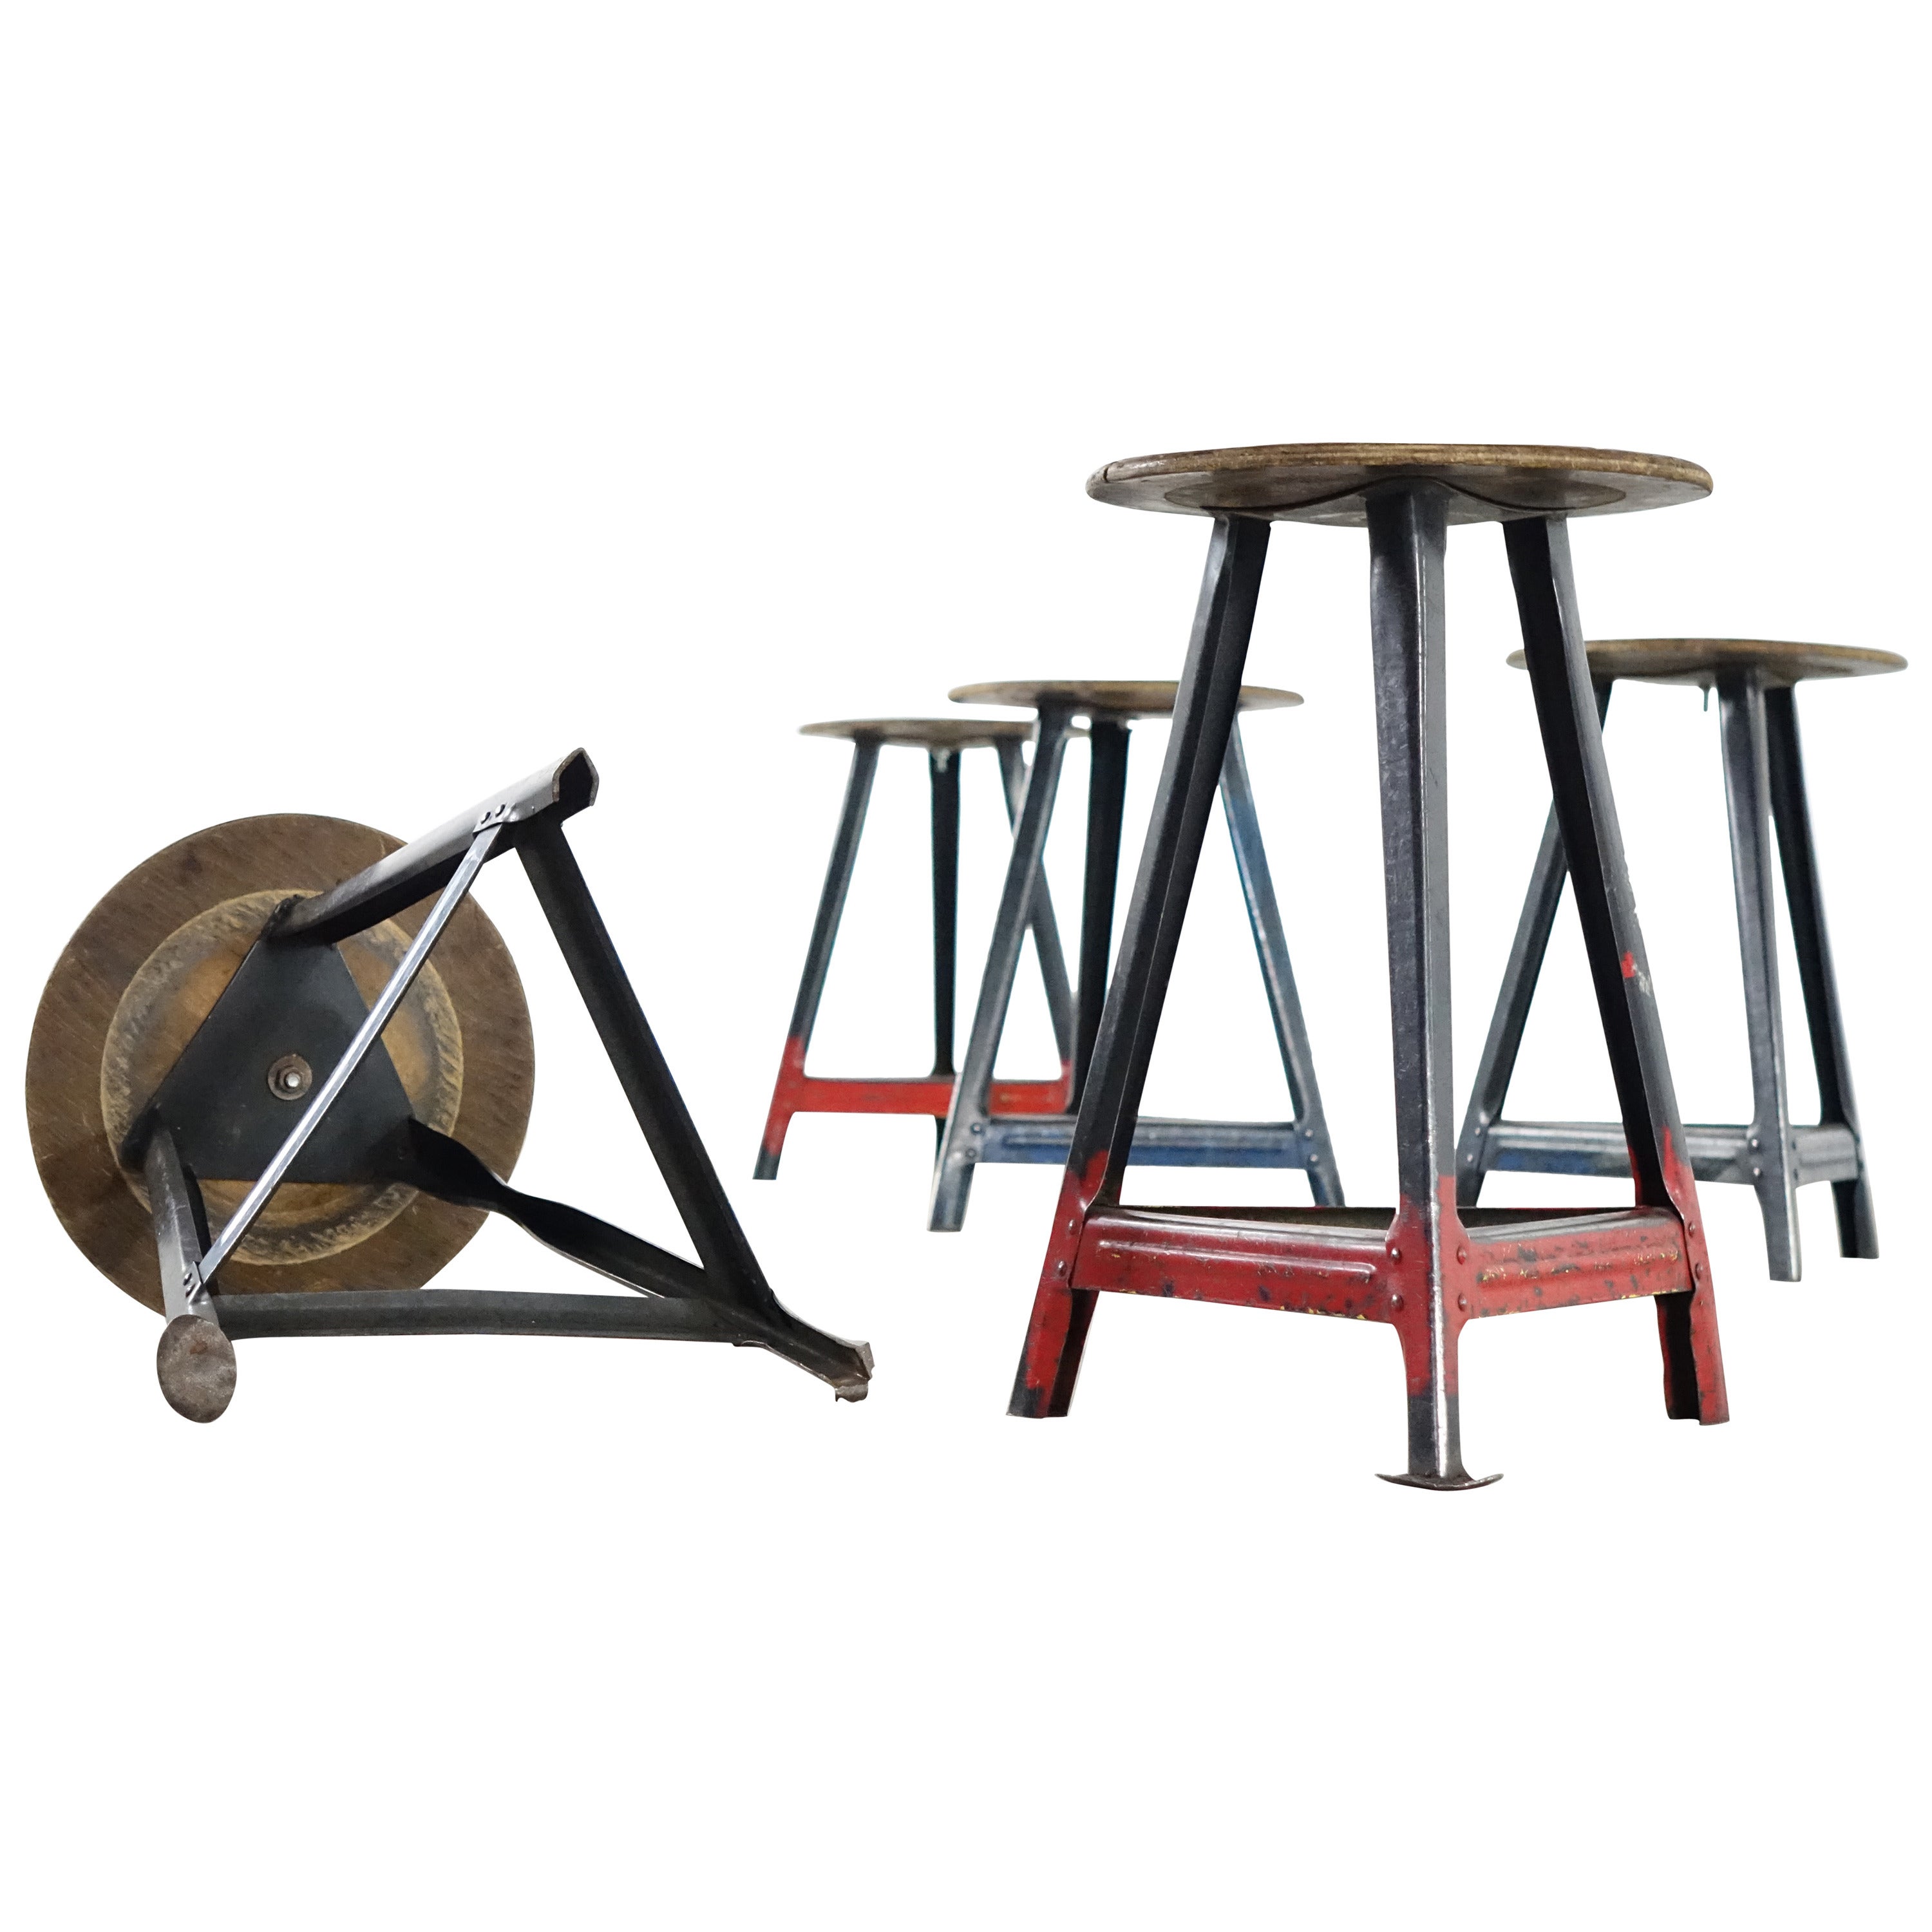 Set of 12 Industrial Stool, Bauhaus in the Style of Rowag Tabouret Tripod